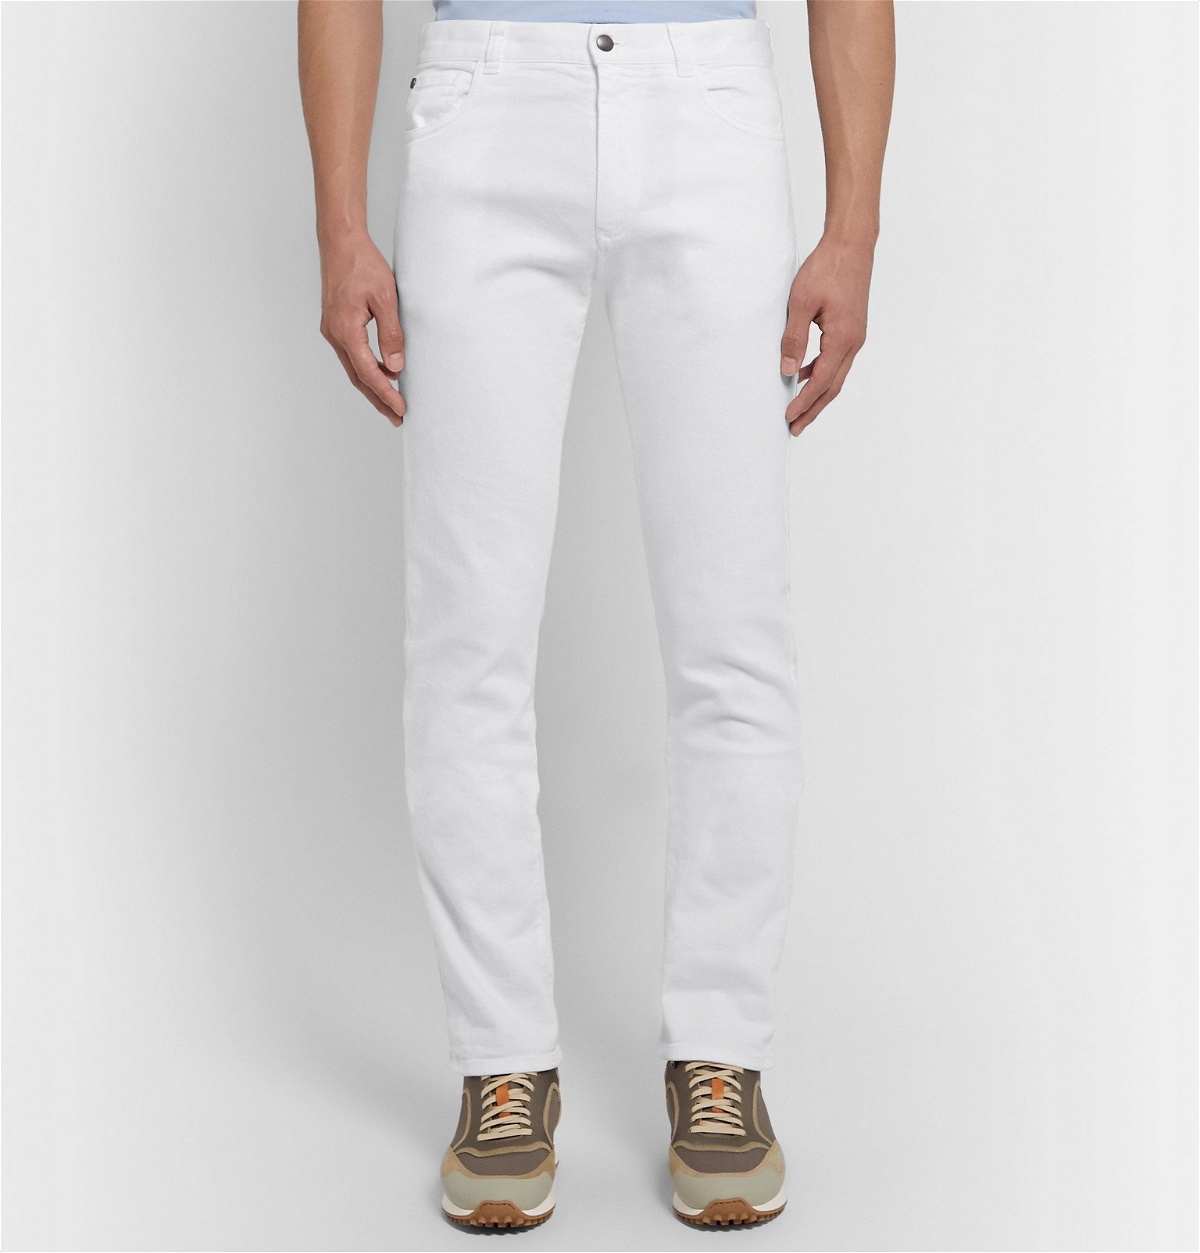 Canali - Slim-Fit Stretch-Cotton Twill Trousers - White Canali